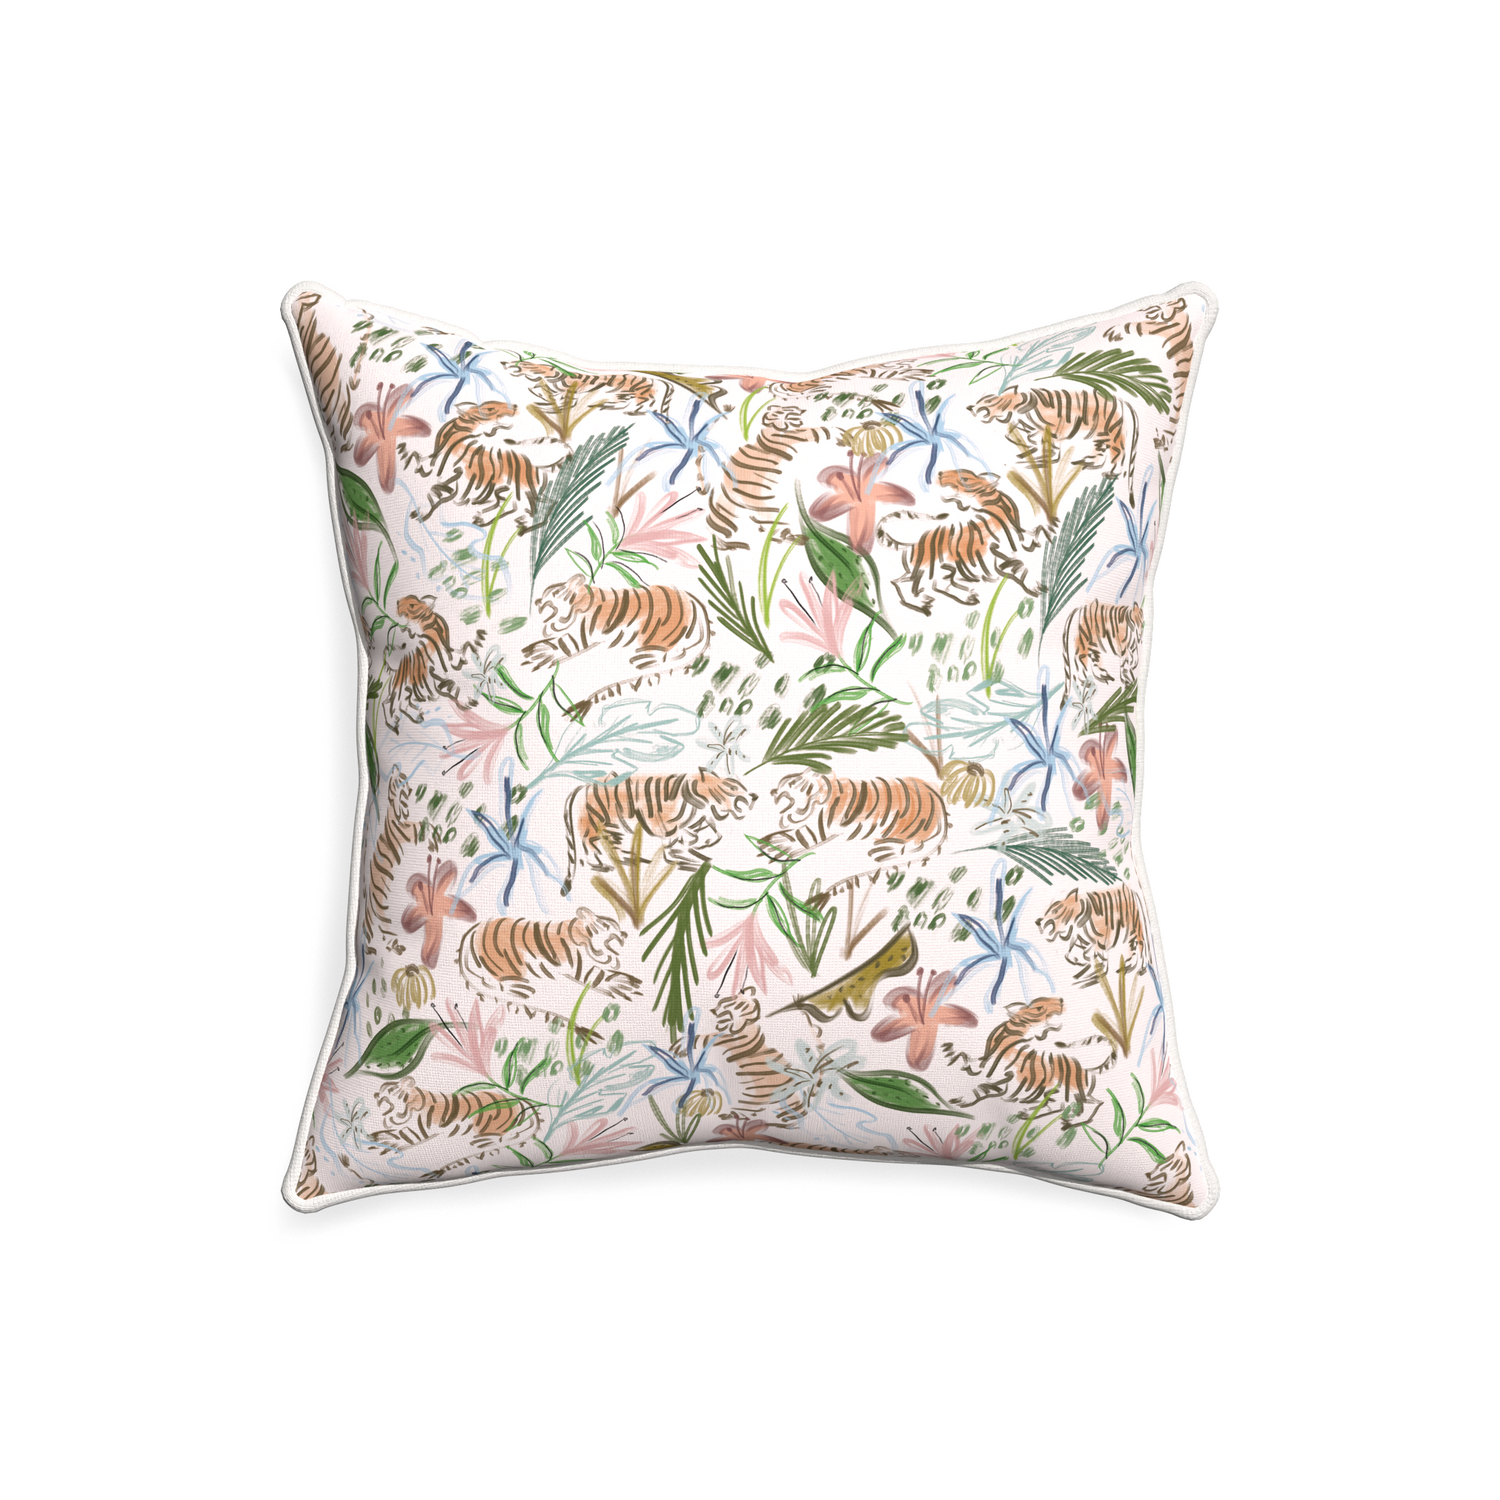 20-square frida pink custom pink chinoiserie tigerpillow with snow piping on white background